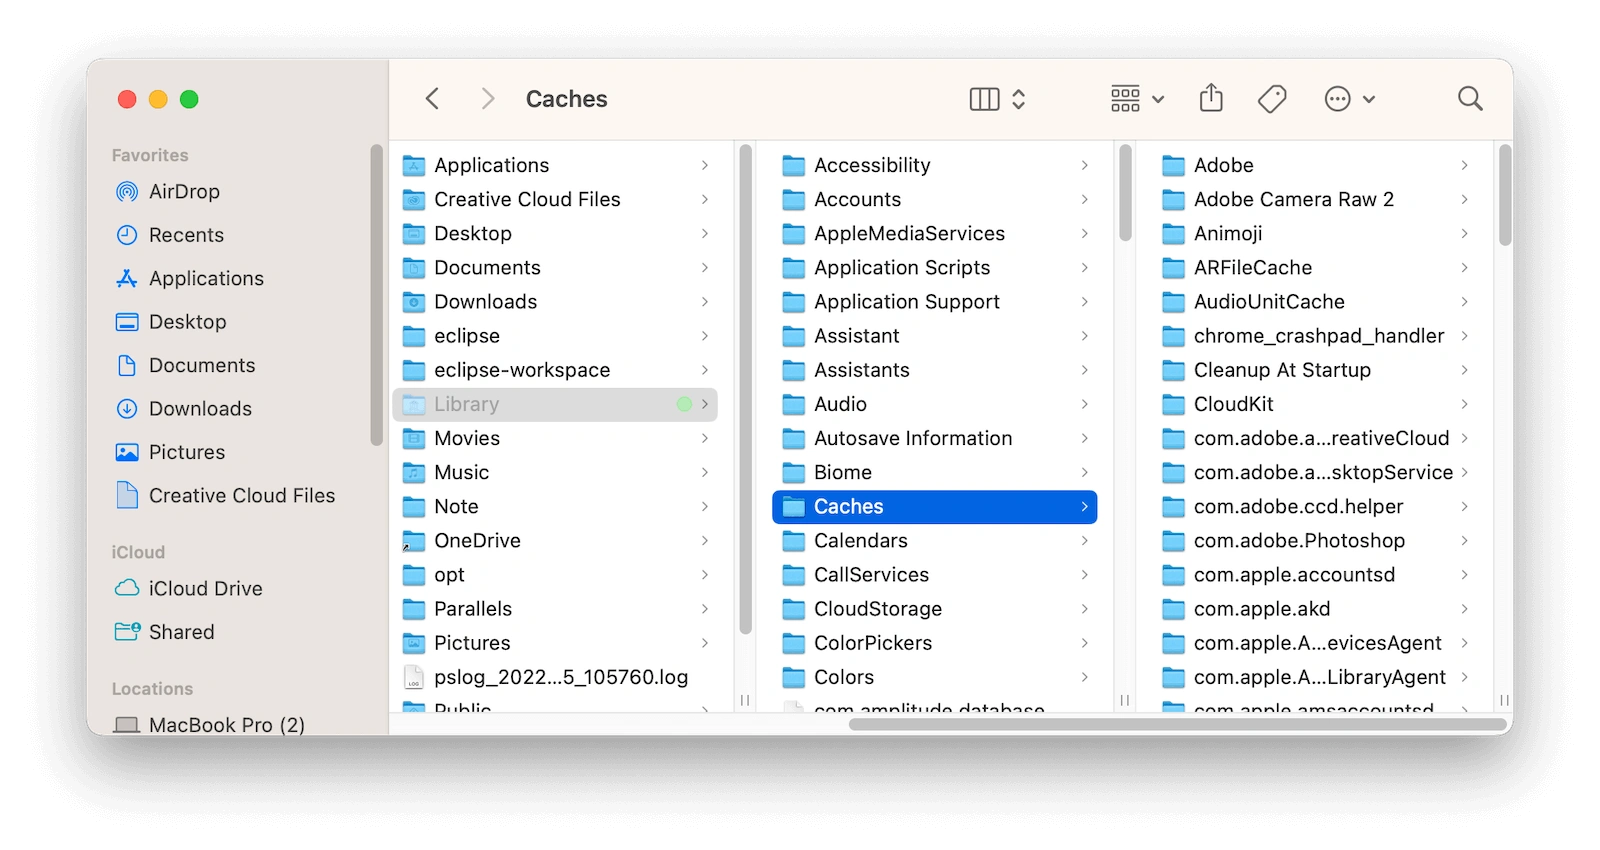 Clear App Cache on Mac with Finder